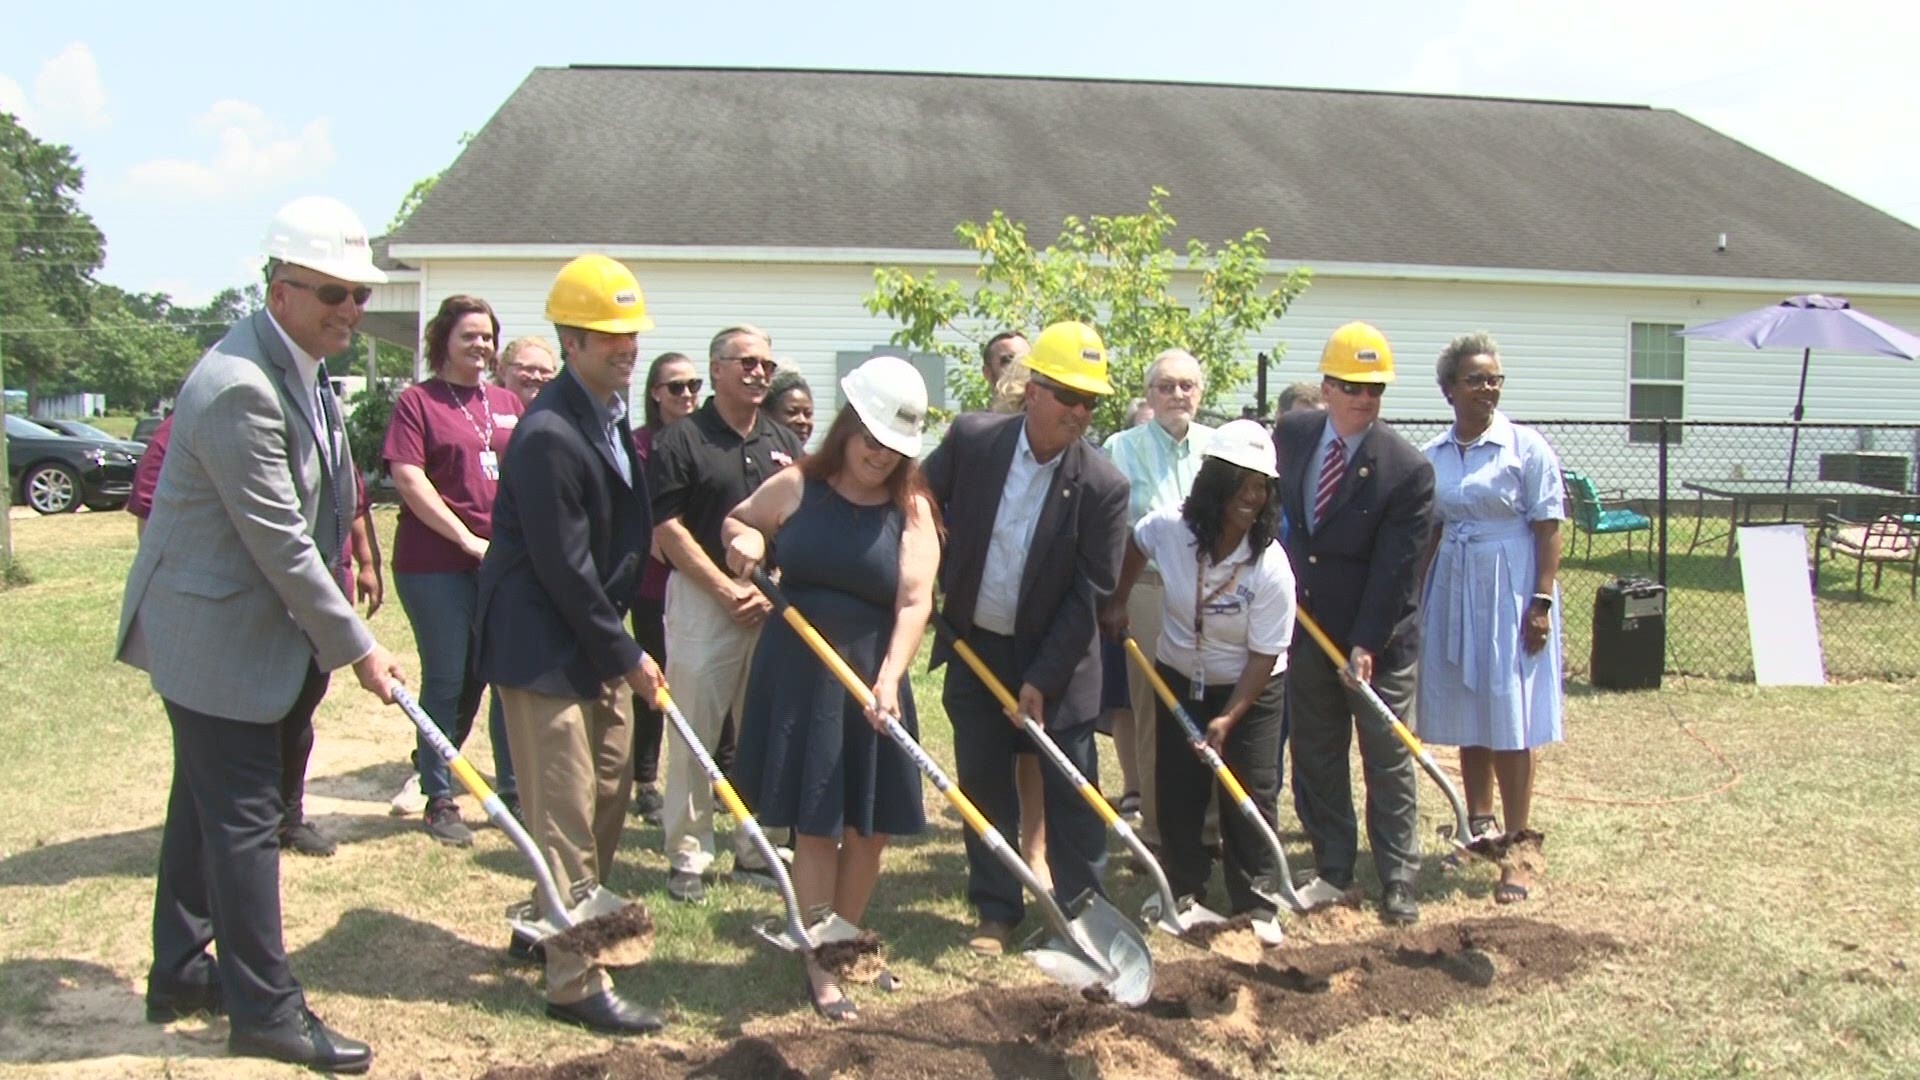 The National Alliance on Mental Illness Central Georgia broke ground for a new group home in Warner Robins.